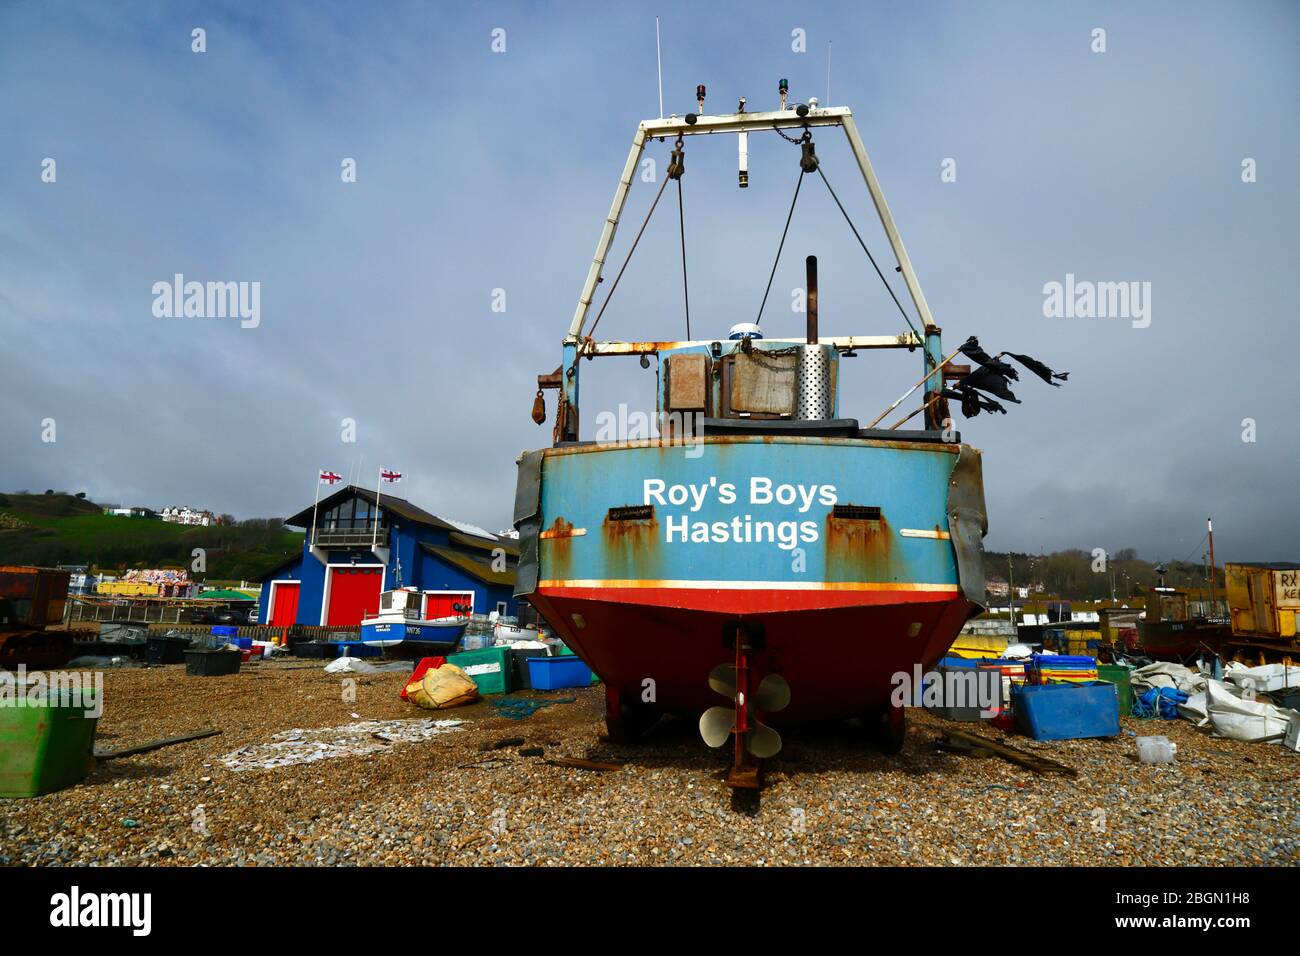 Roy's Boys fishing boat on The Stade shingle beach, lifeboat station in background, Hastings, East Sussex, England, UK Stock Photo